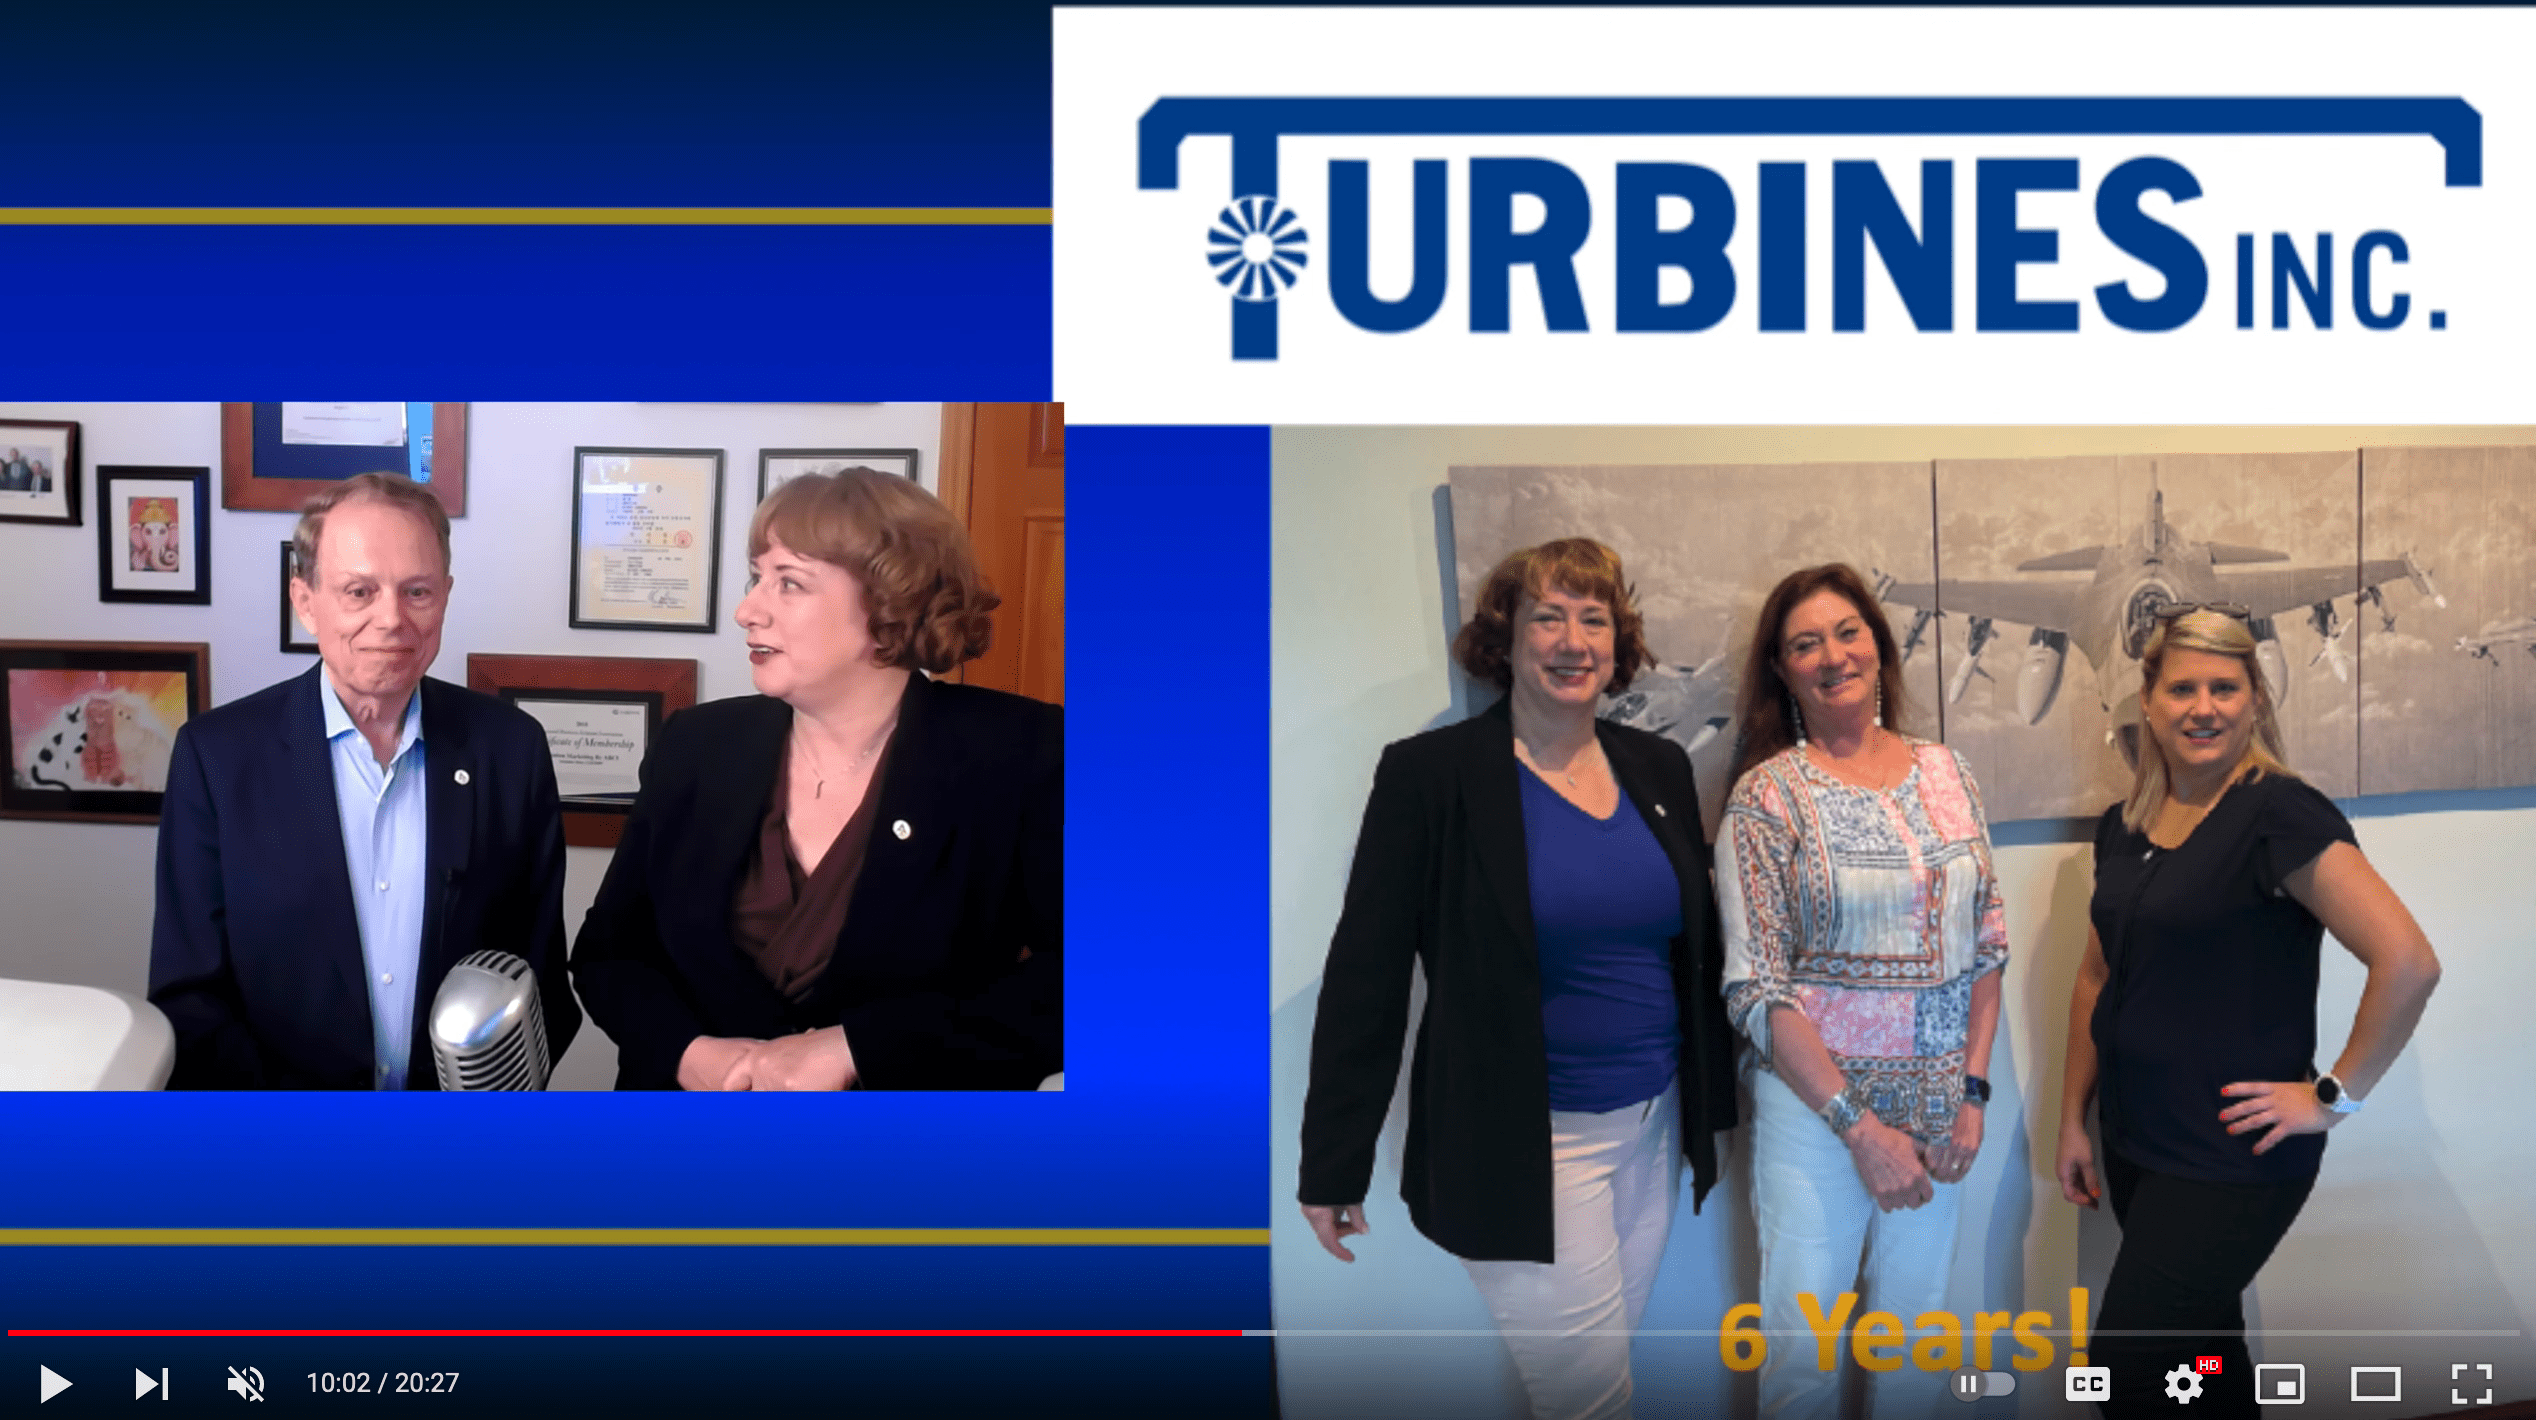 Peg Mills and Jane Santucci of Turbines Inc. have been ABCI clients for SIX years!